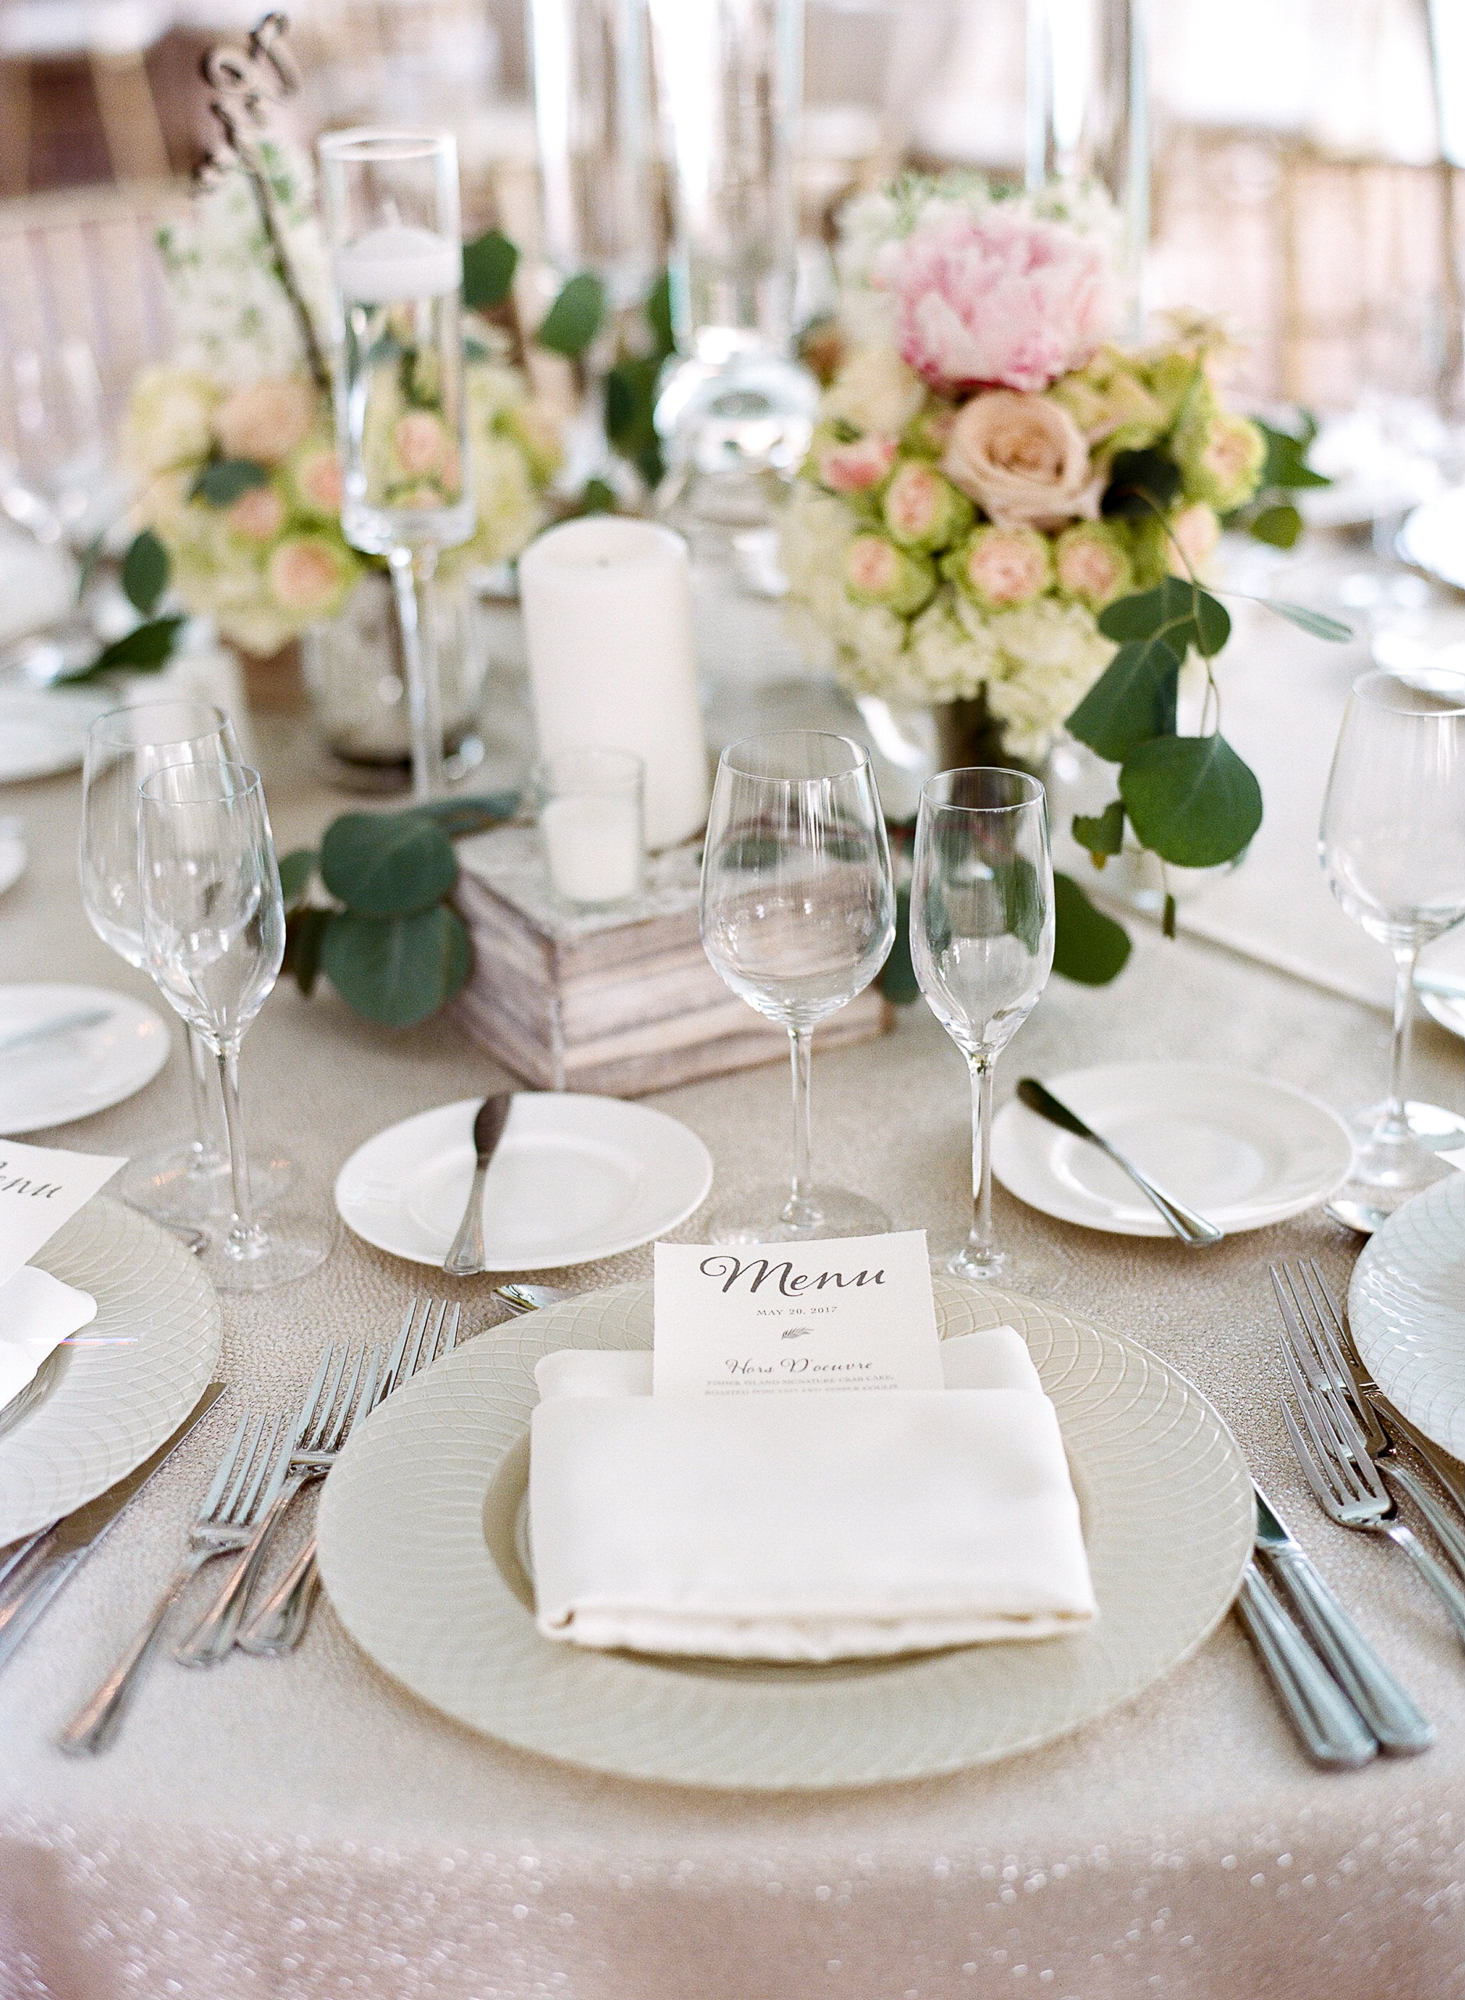 The centerpieces featured white washed wood boxes and lots of greenery